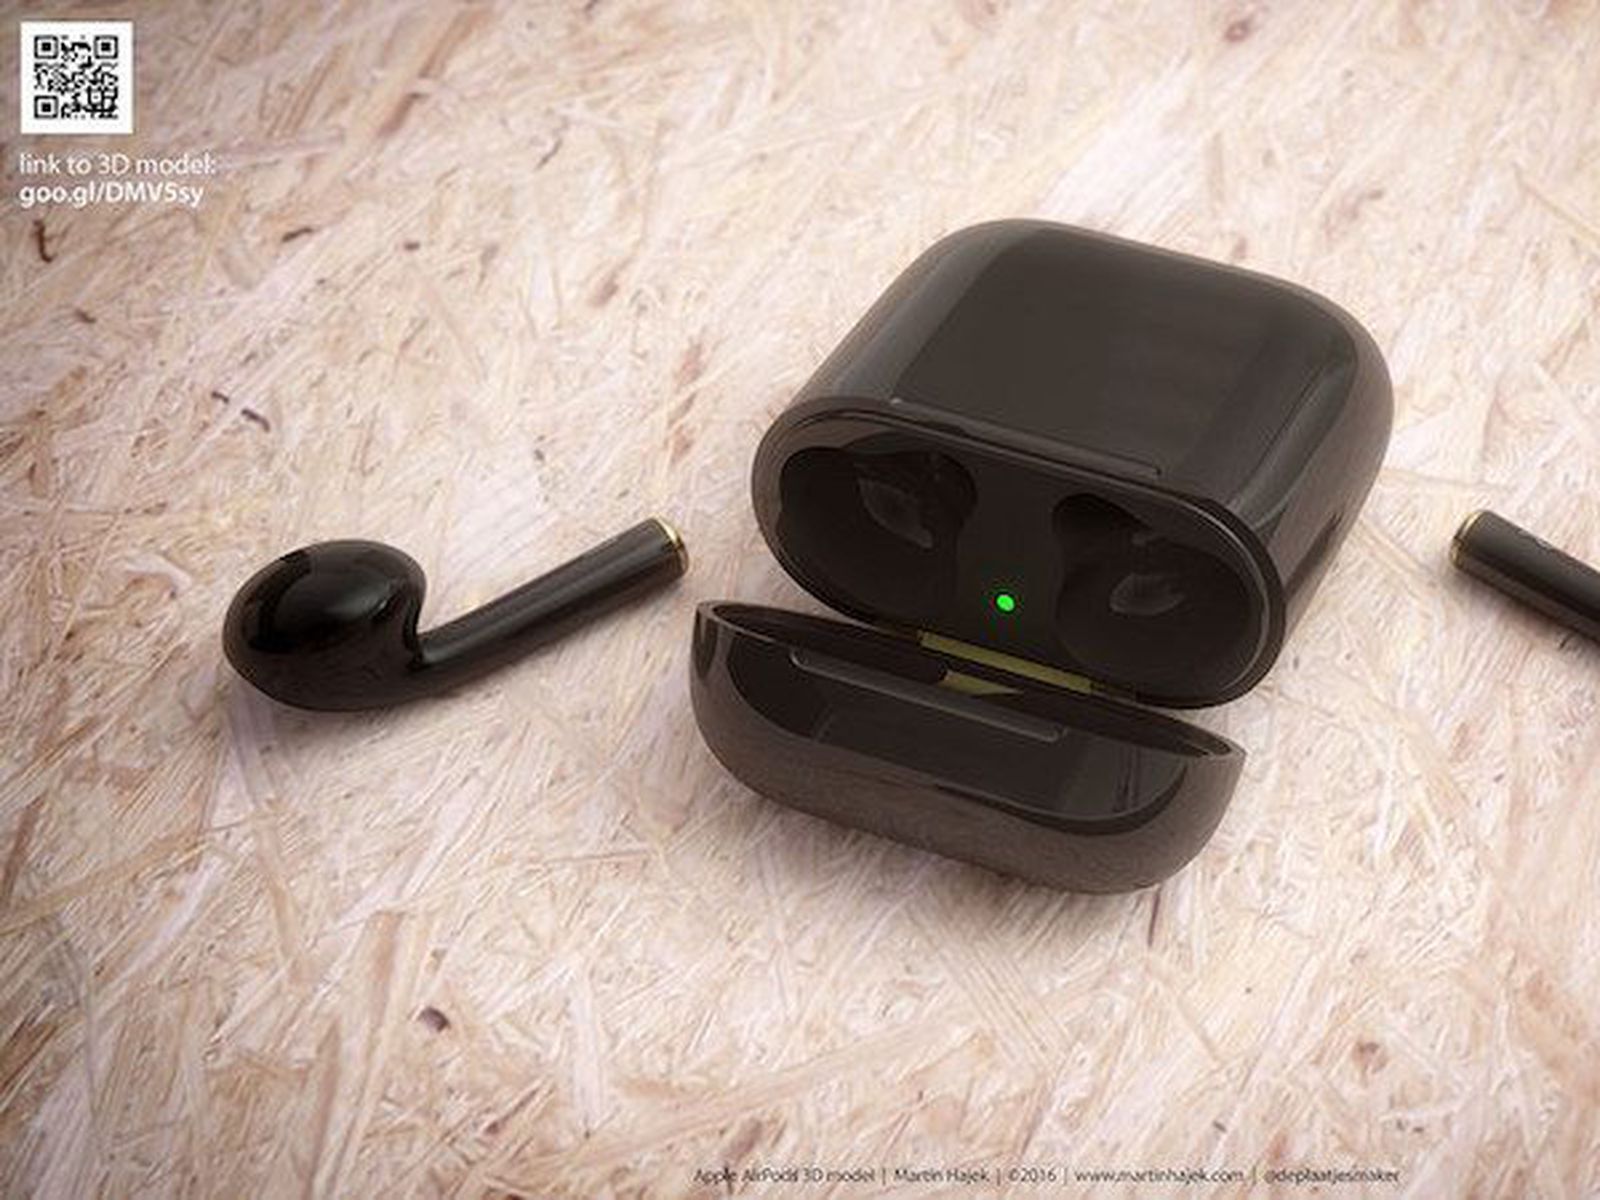 biograf let Allergisk Black AirPods: Where Are They? - MacRumors